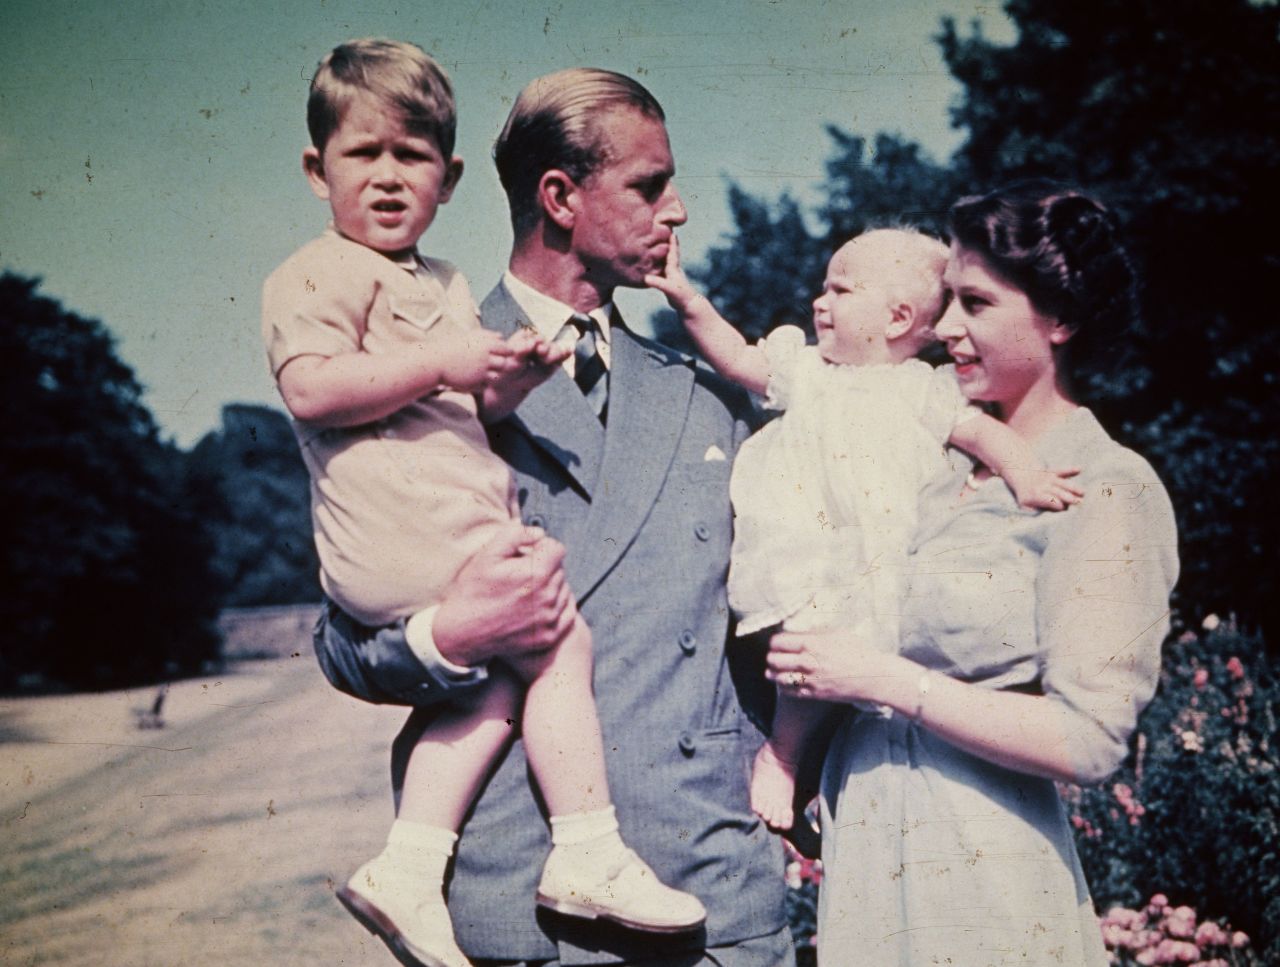 Prince Philip with the Queen (then Princess Elizabeth) and their children Prince Charles and Princess Anne. with his young family. (Photo by Keystone/Hulton Archive/Getty Images)